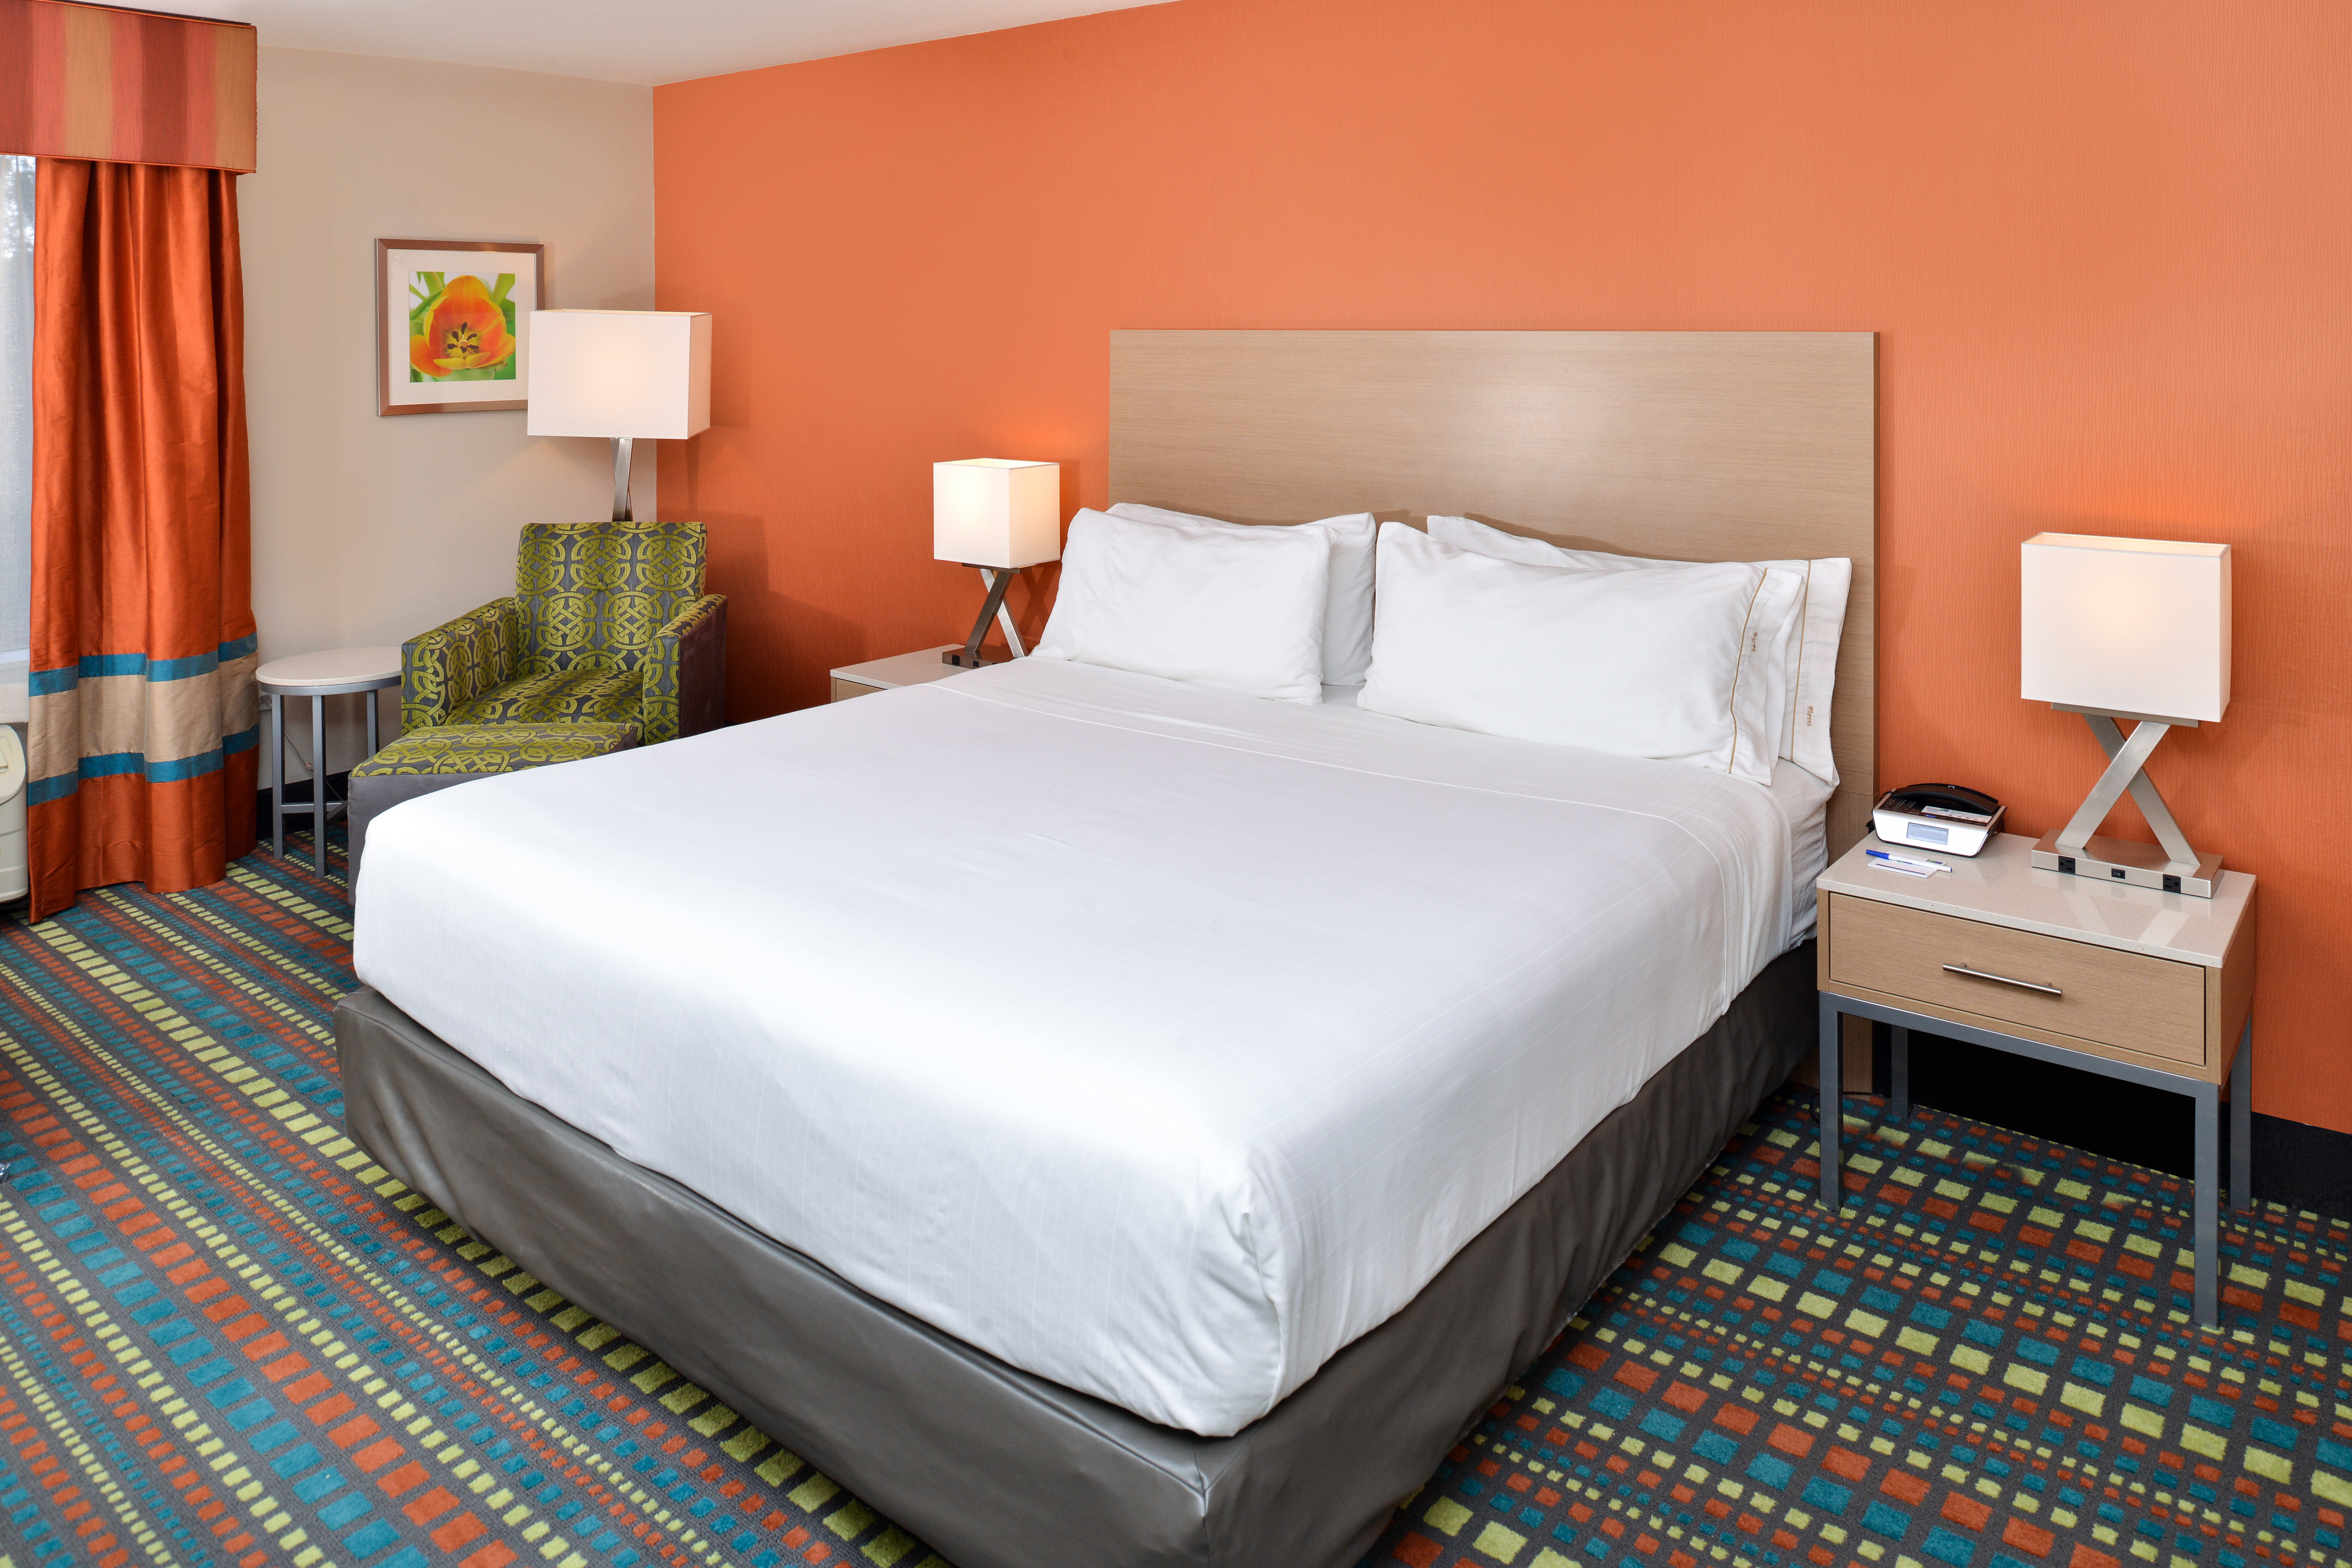 Our standard king guest room is perfect for corporate travelers